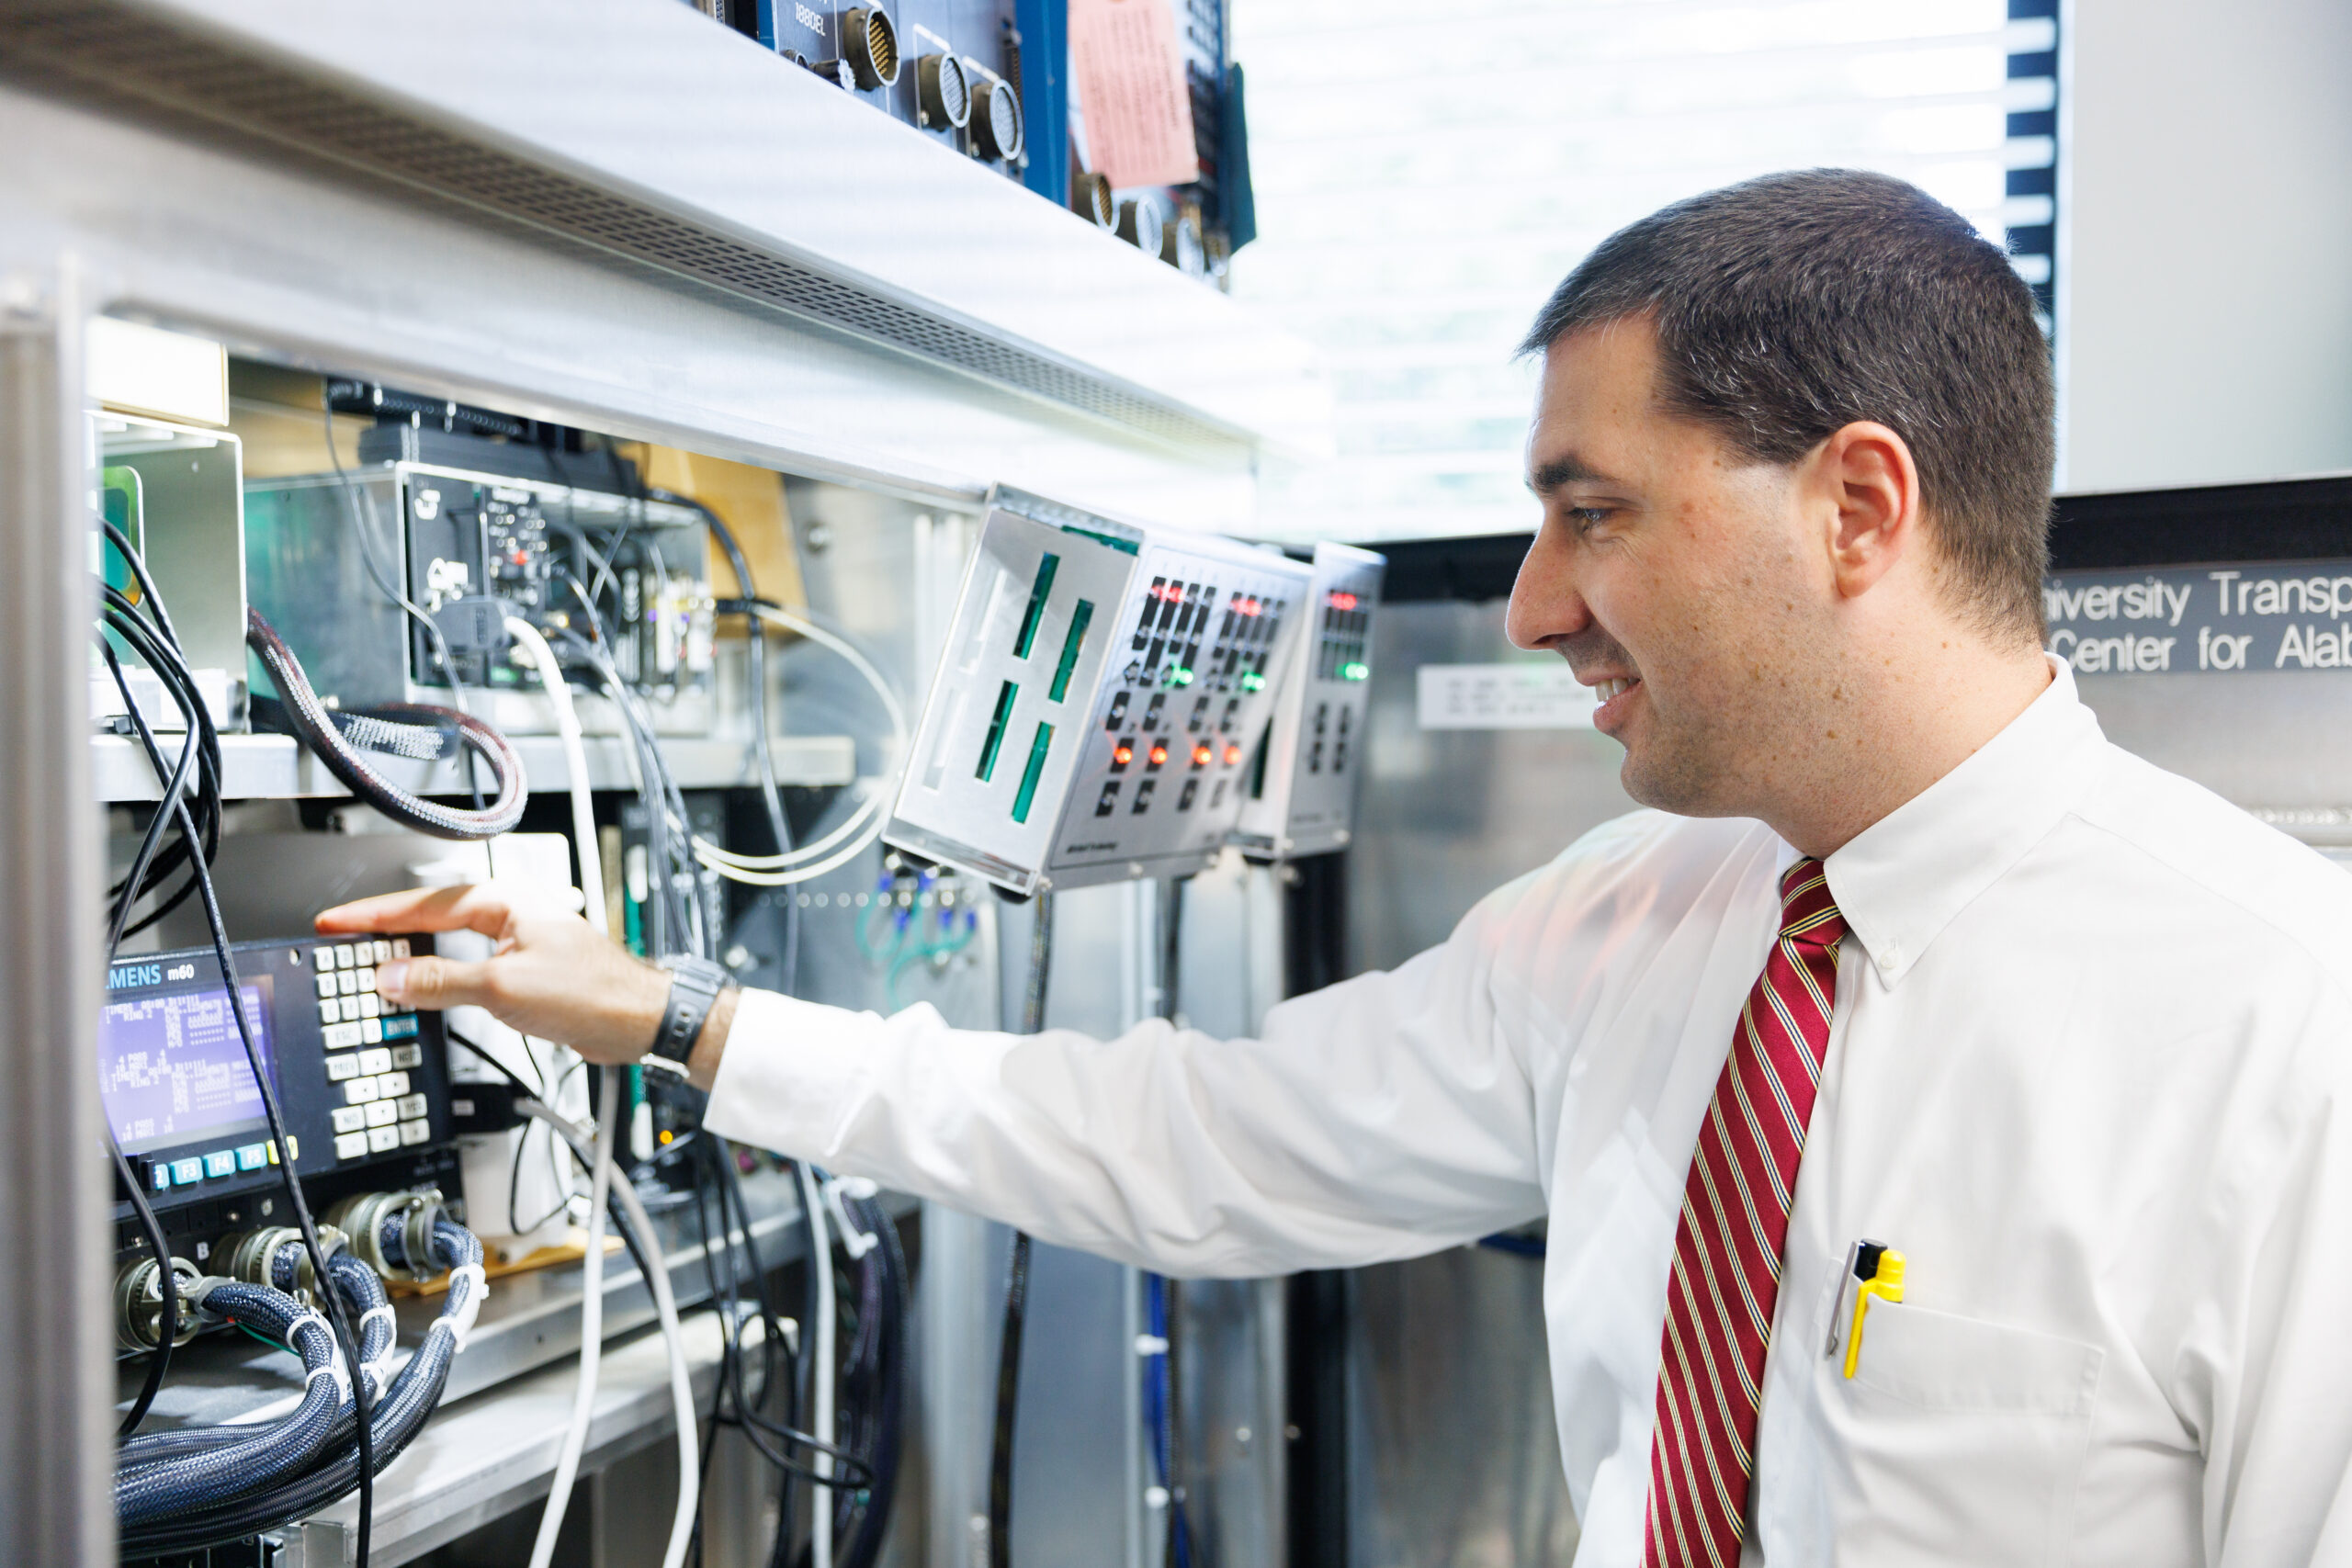 Dr. Alex Hainen working with various control panels and electronic equipment in a laboratory.